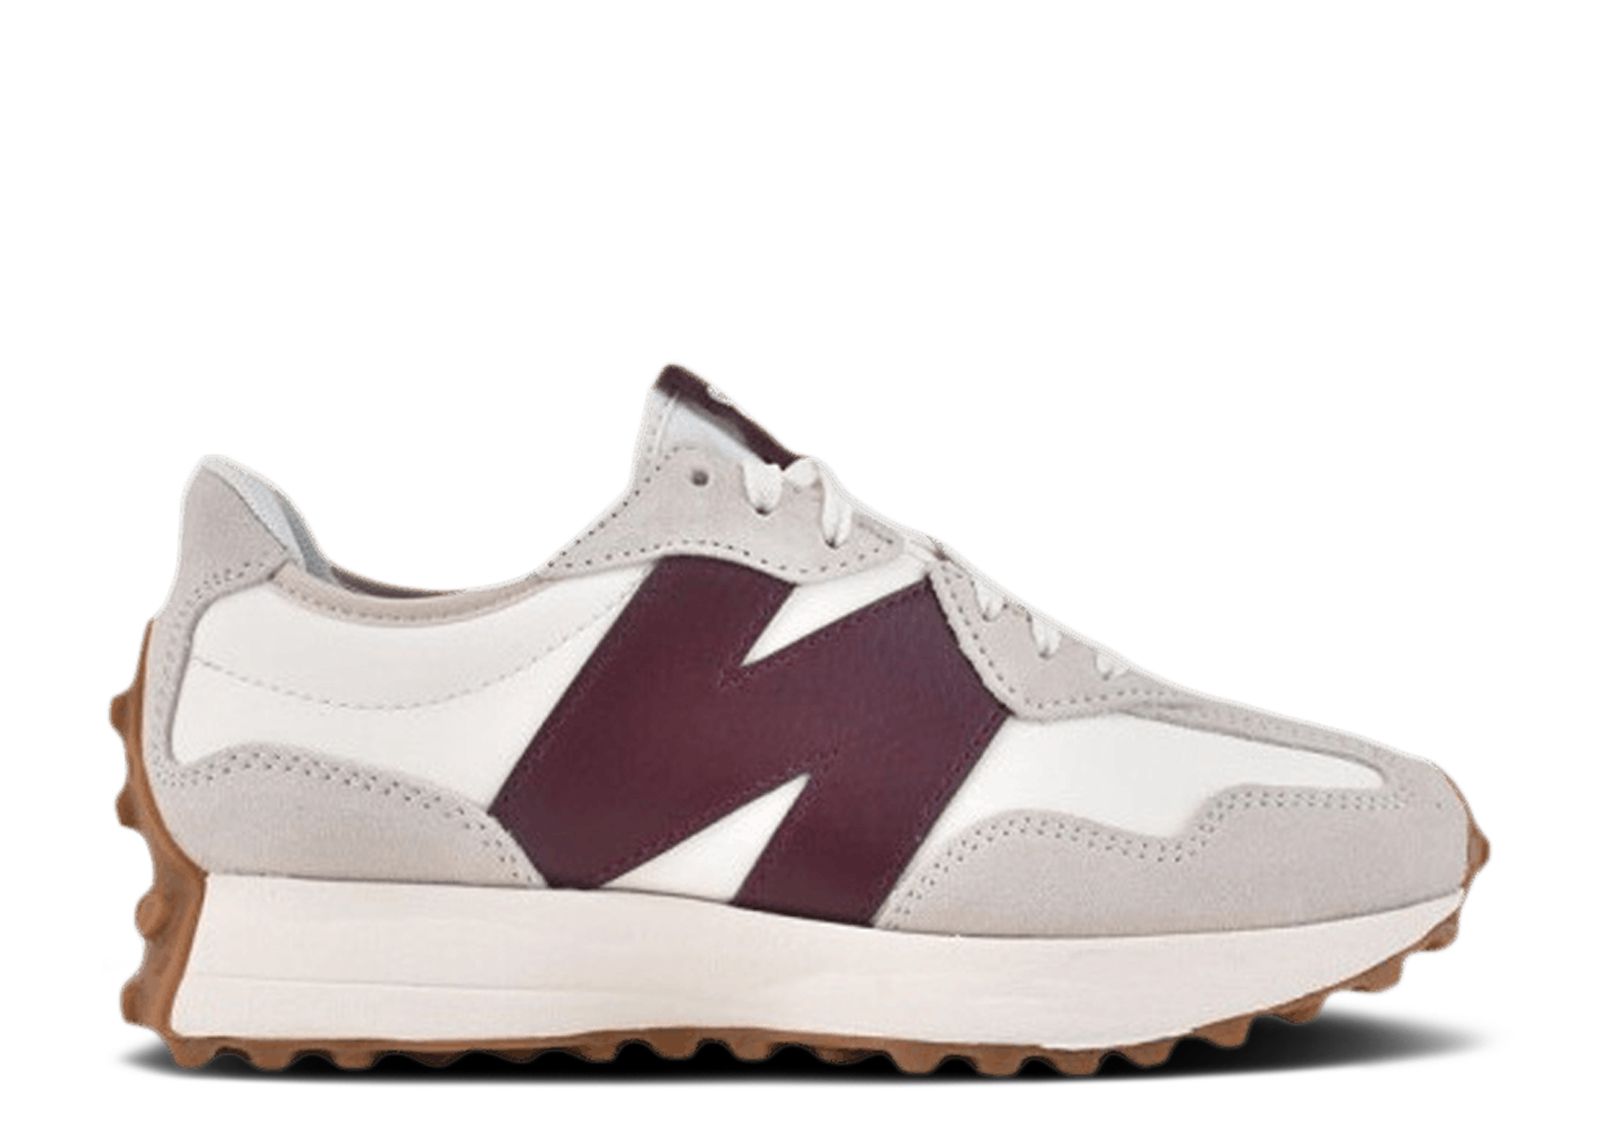 New Balance 327 trainers in off white and brown - exclusive to